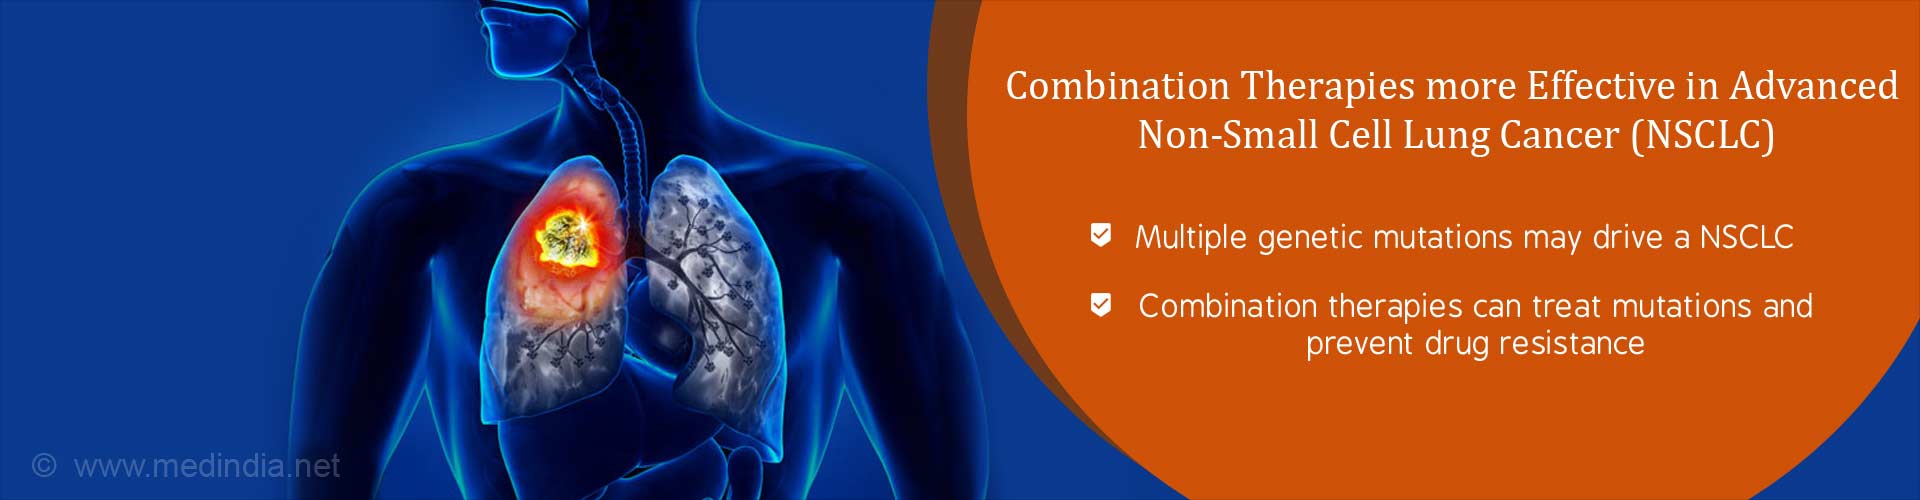 combination therapies more effective in advanced non-small cell lung cancer (NSCLC)
- multiple genetic mutations may drive a NSCLC
- combination therapies can treat mutations and prevent drug resistance